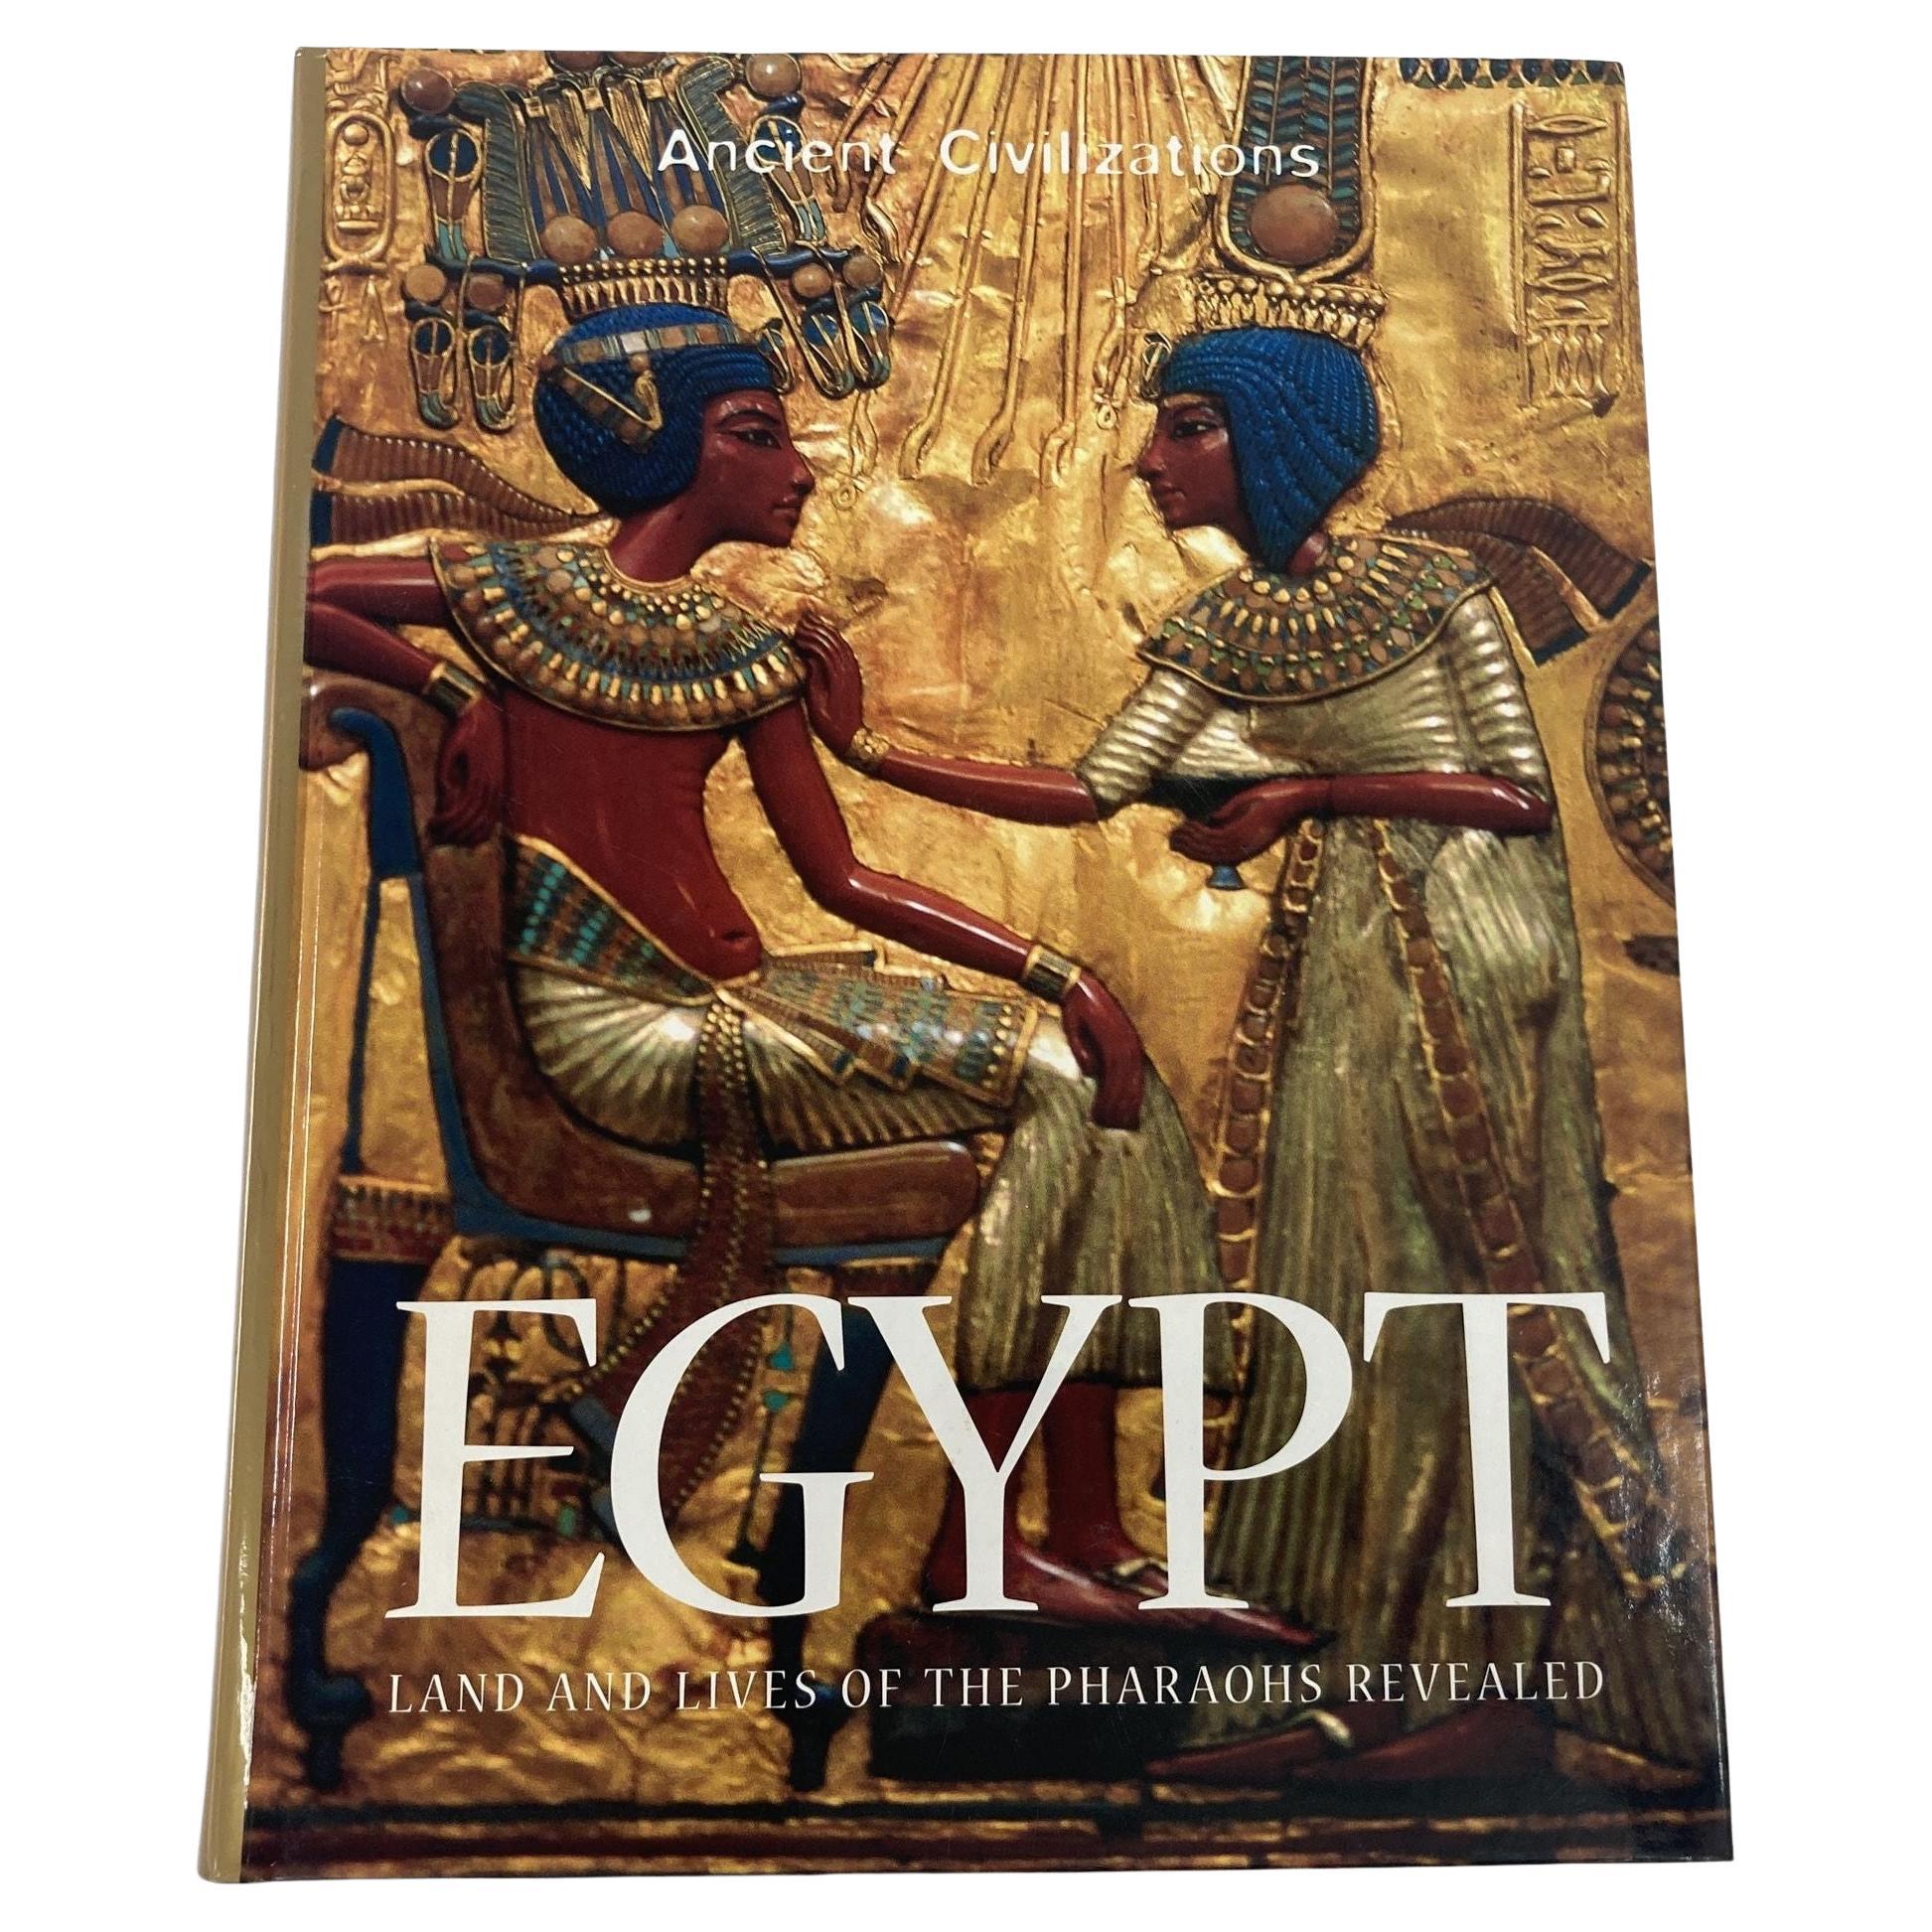 Ägypten: Land and Lives of the Pharaohs, Revealed Hardcoverbuch von Cheryl Perry